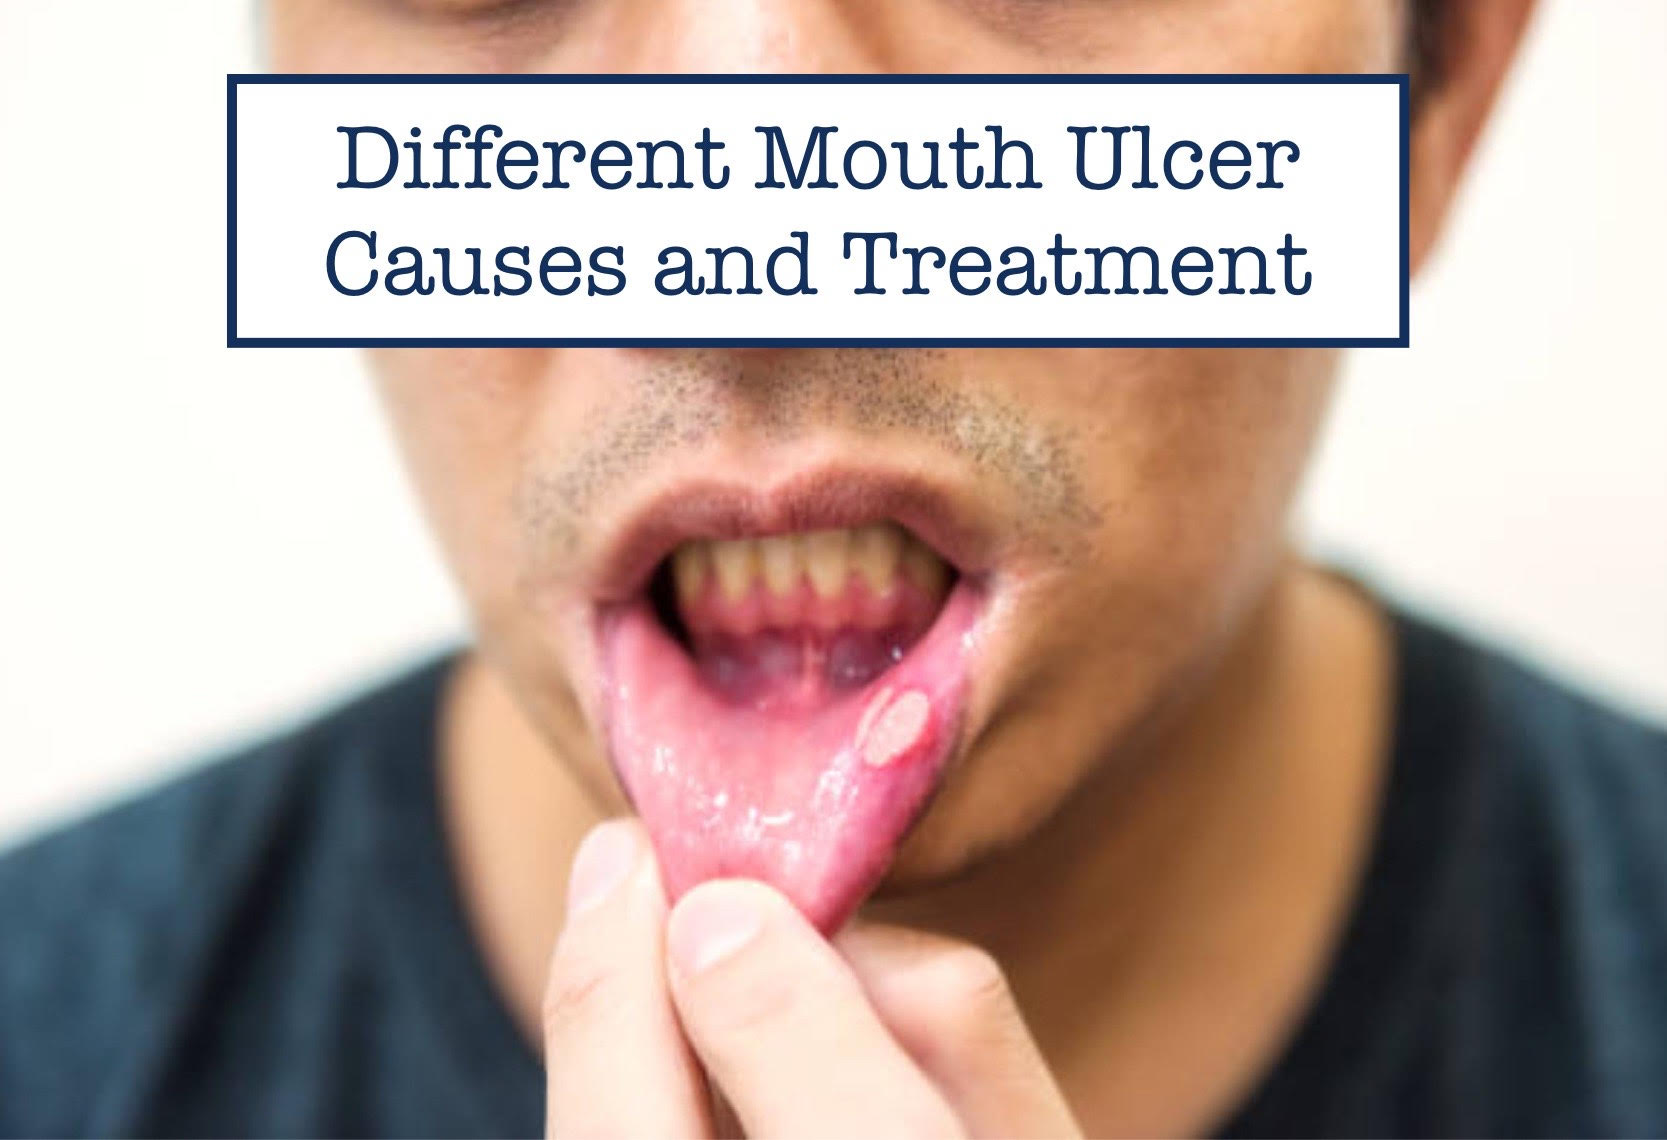 Different Mouth Ulcer Causes and Treatment 